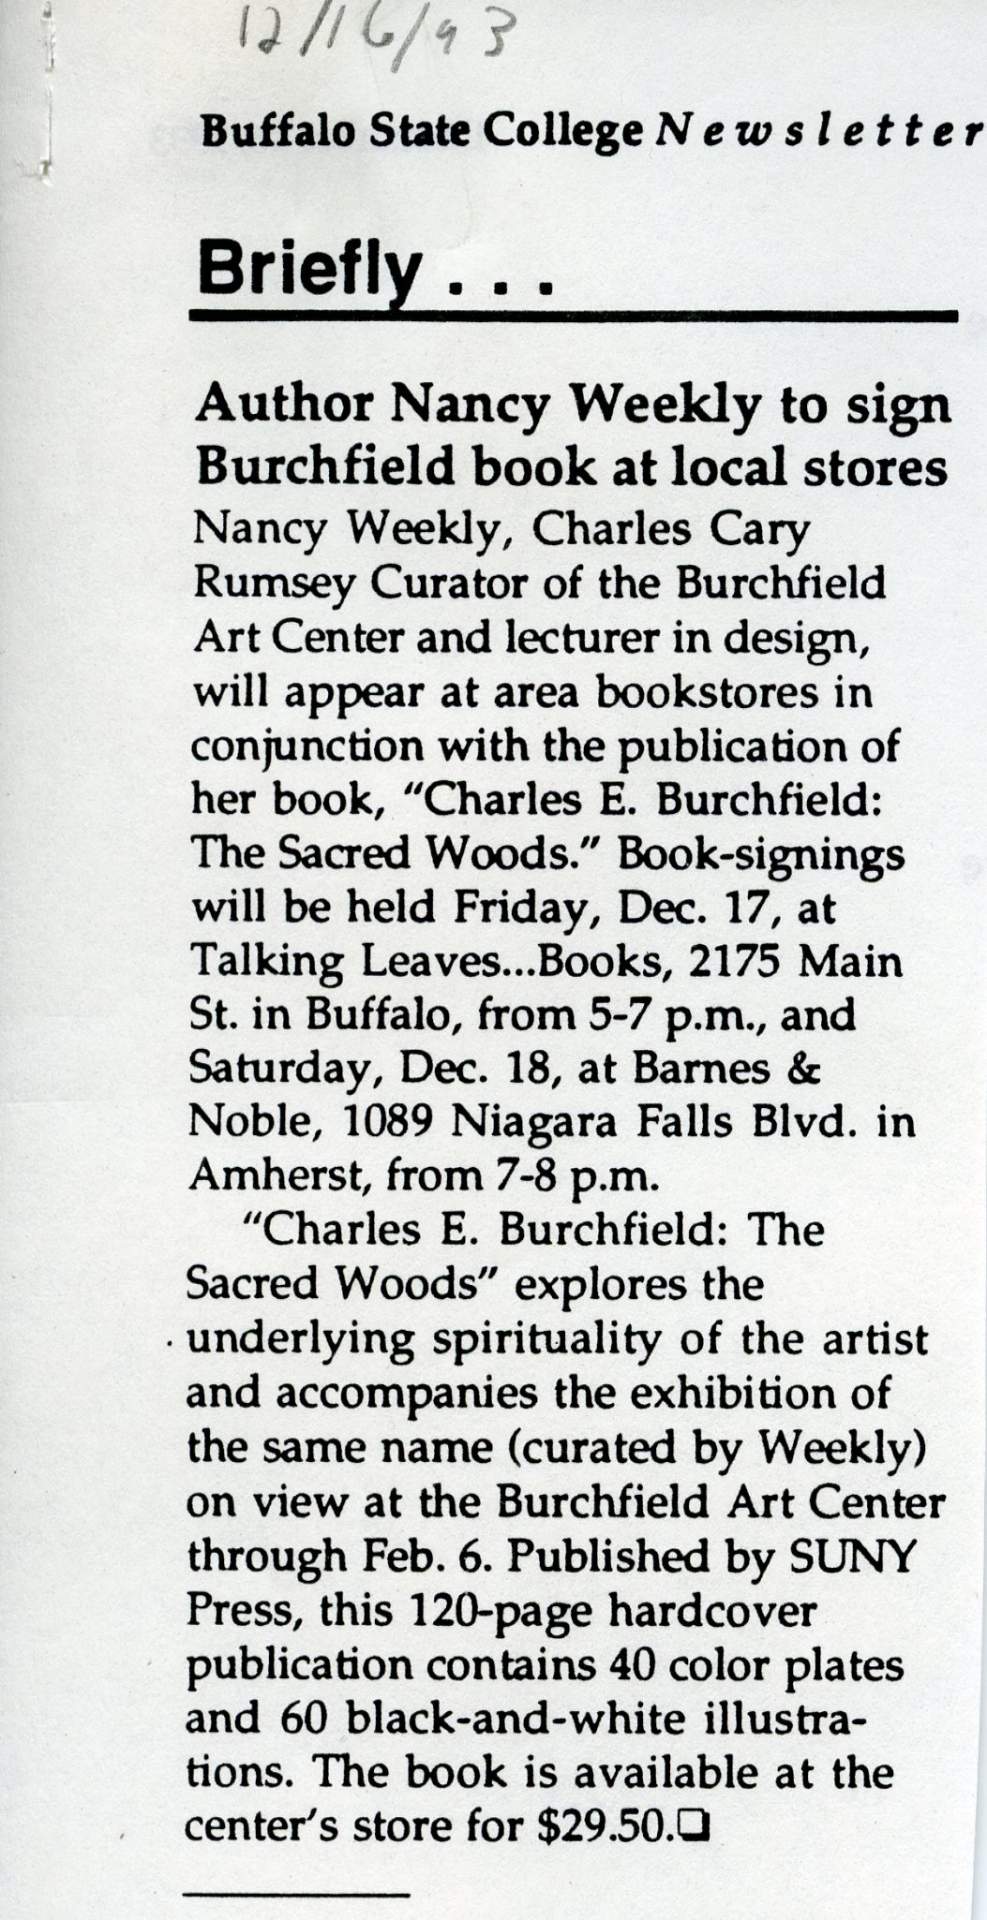 "Author Nancy Weekly to Burchfield book at local stores"